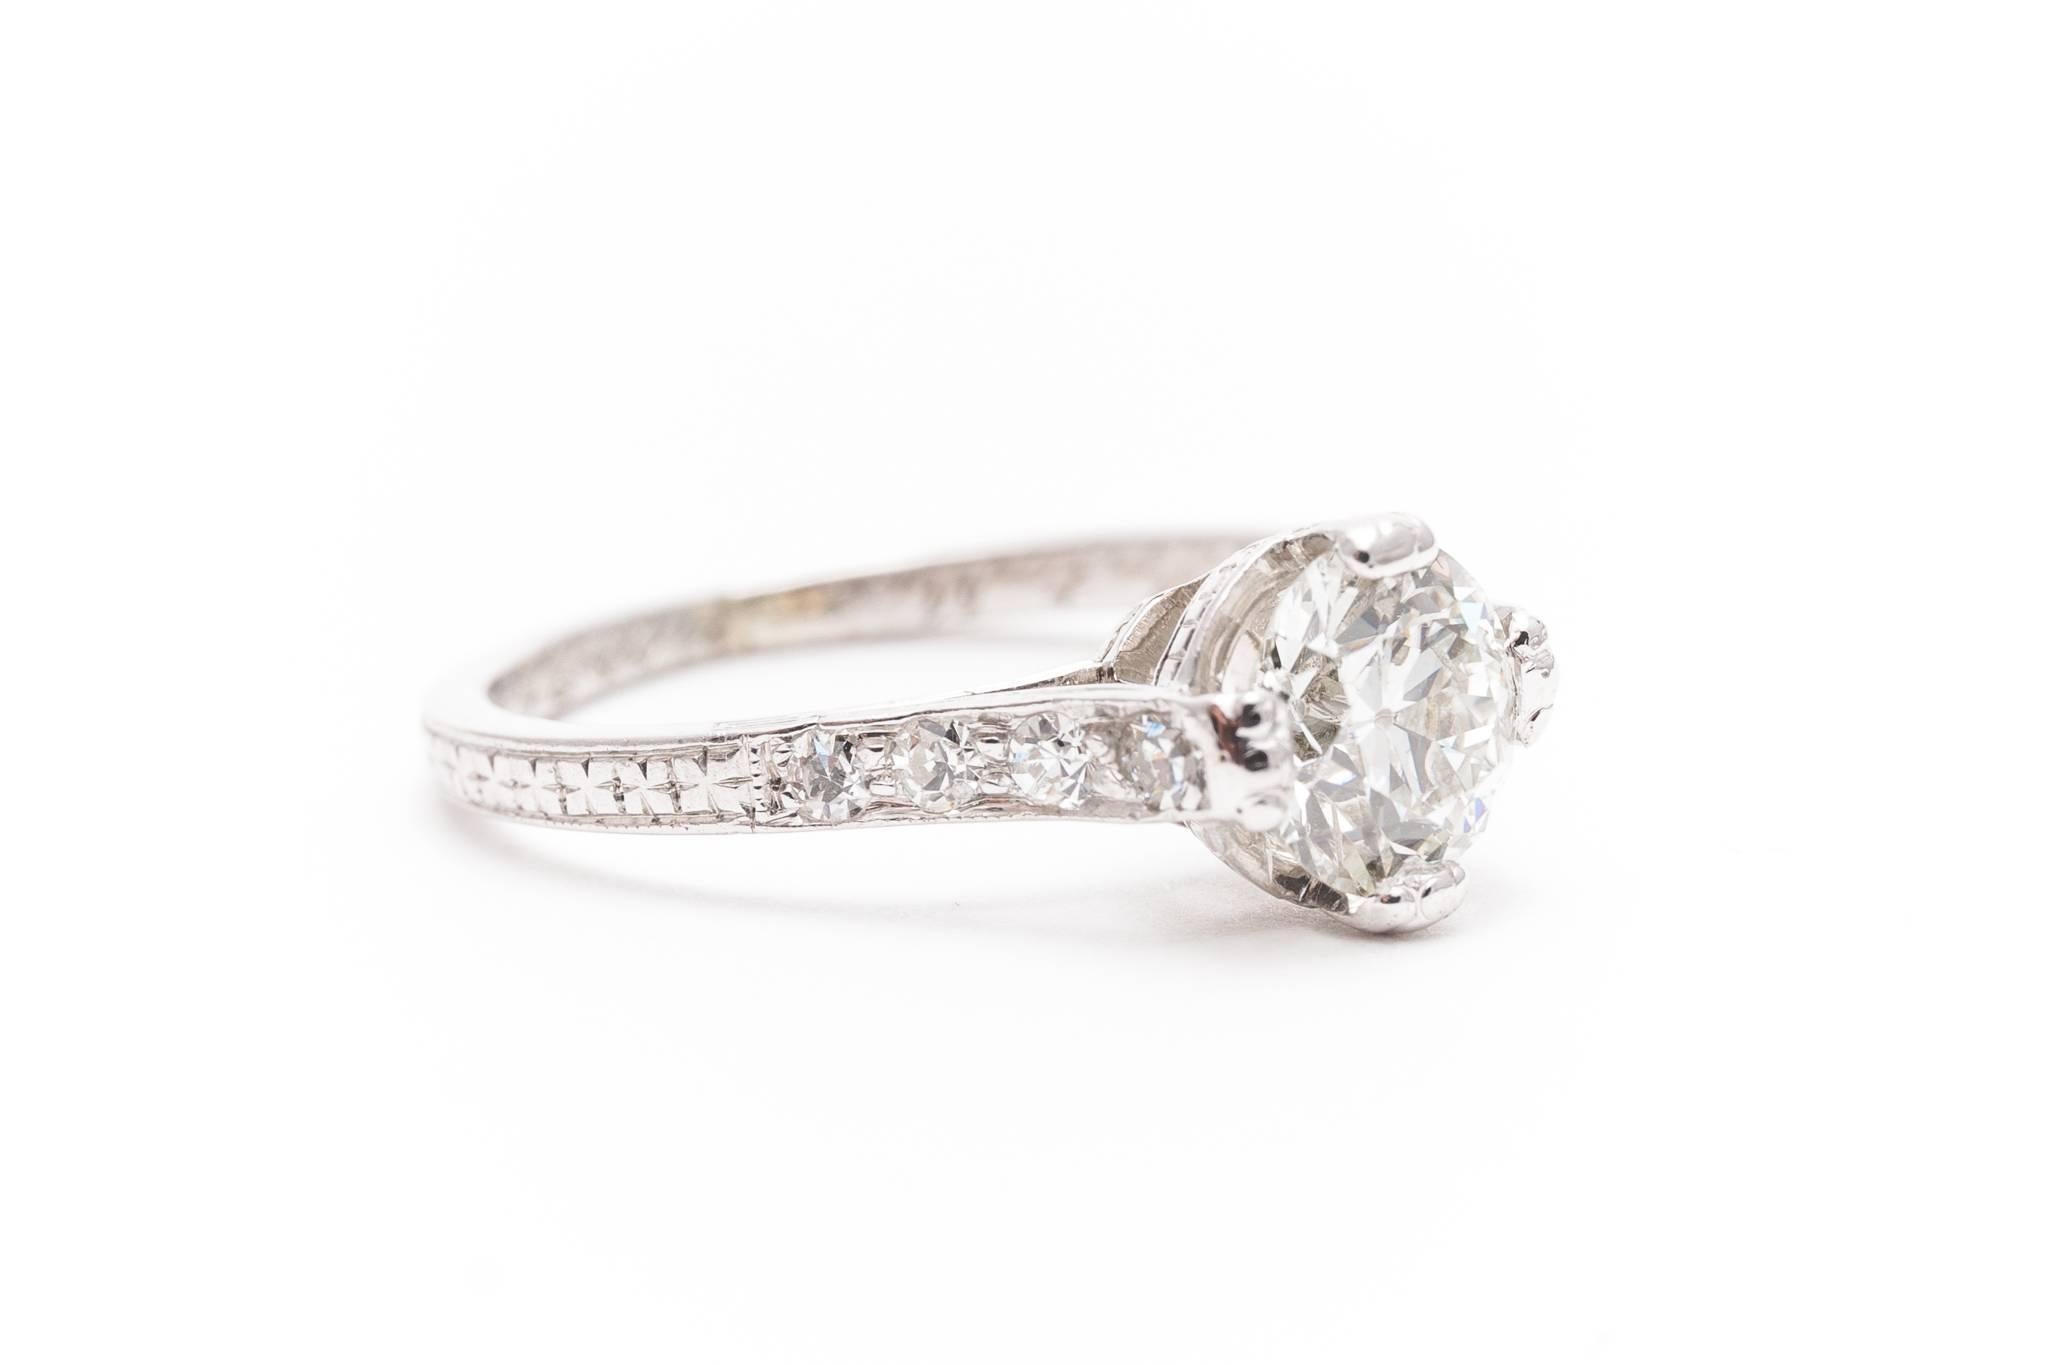 Beacon Hill Jewelers Presents:

A beautiful original art deco period diamond engagement ring in luxurious platinum. Centered by a sparkling 1.02 carat antique European cut diamond this ring features beautiful hand engraving throughout the hand